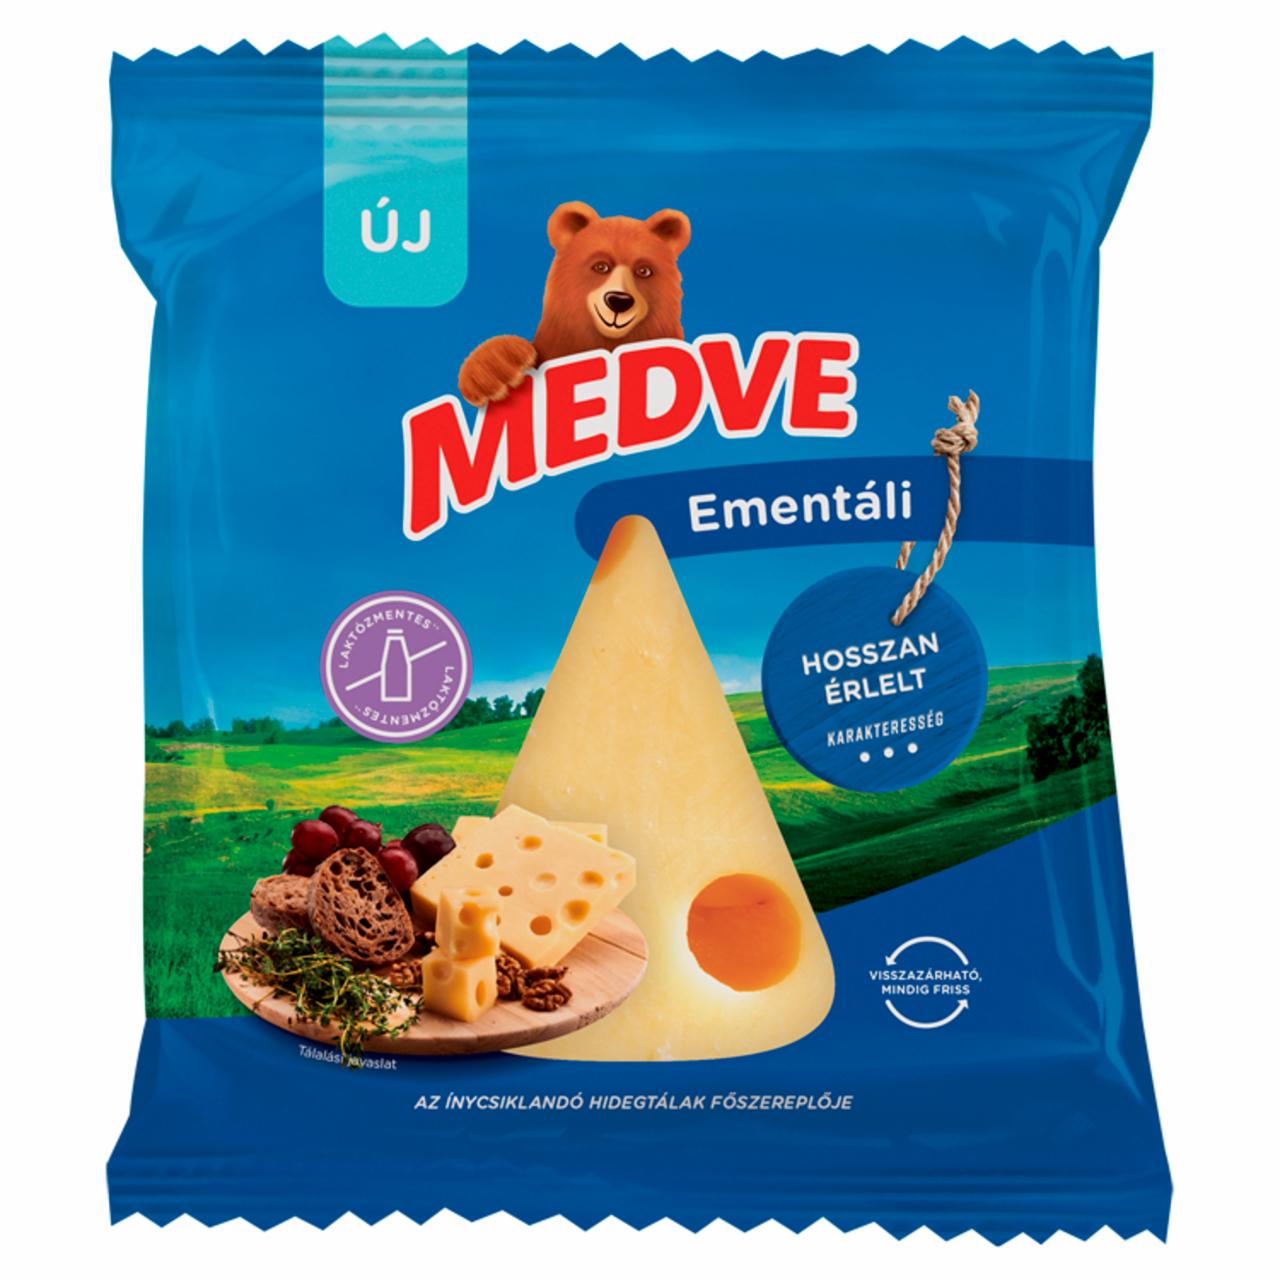 Photo - Medve Fat, Hard, Chopped Emmental Cheese 170 g